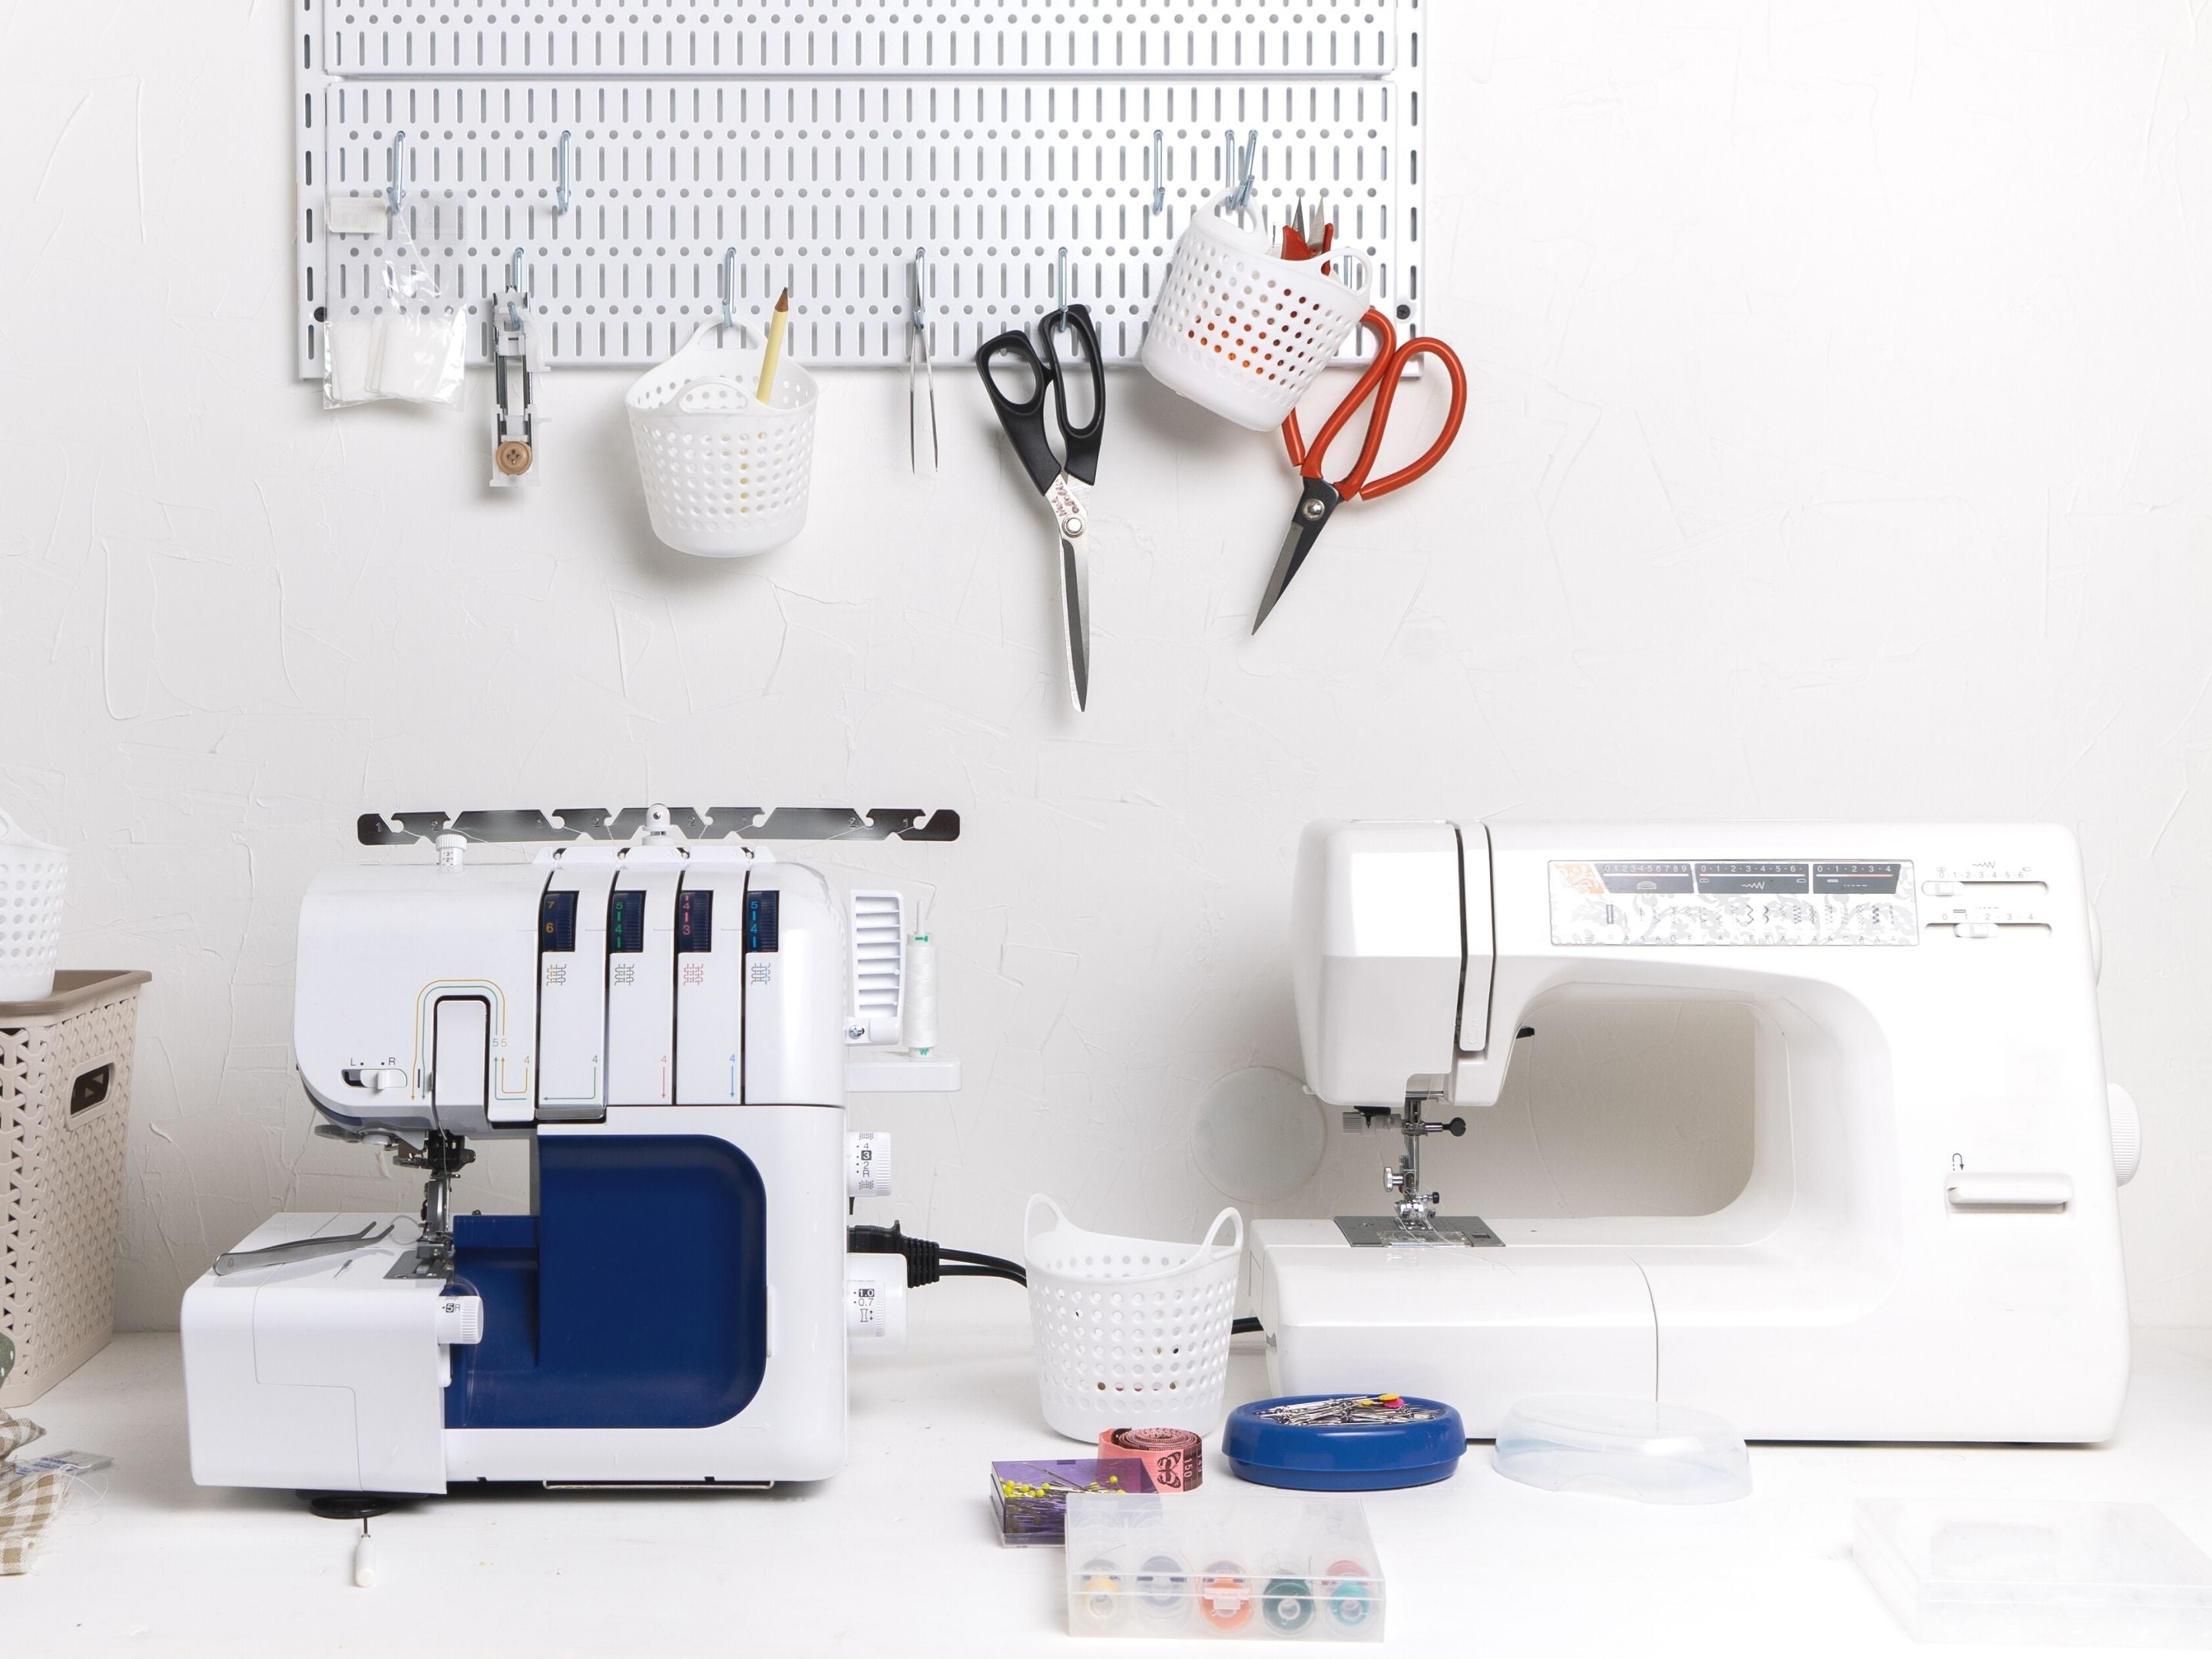 Sewing Space with Sewing Machine and Serger on Table plus Tools